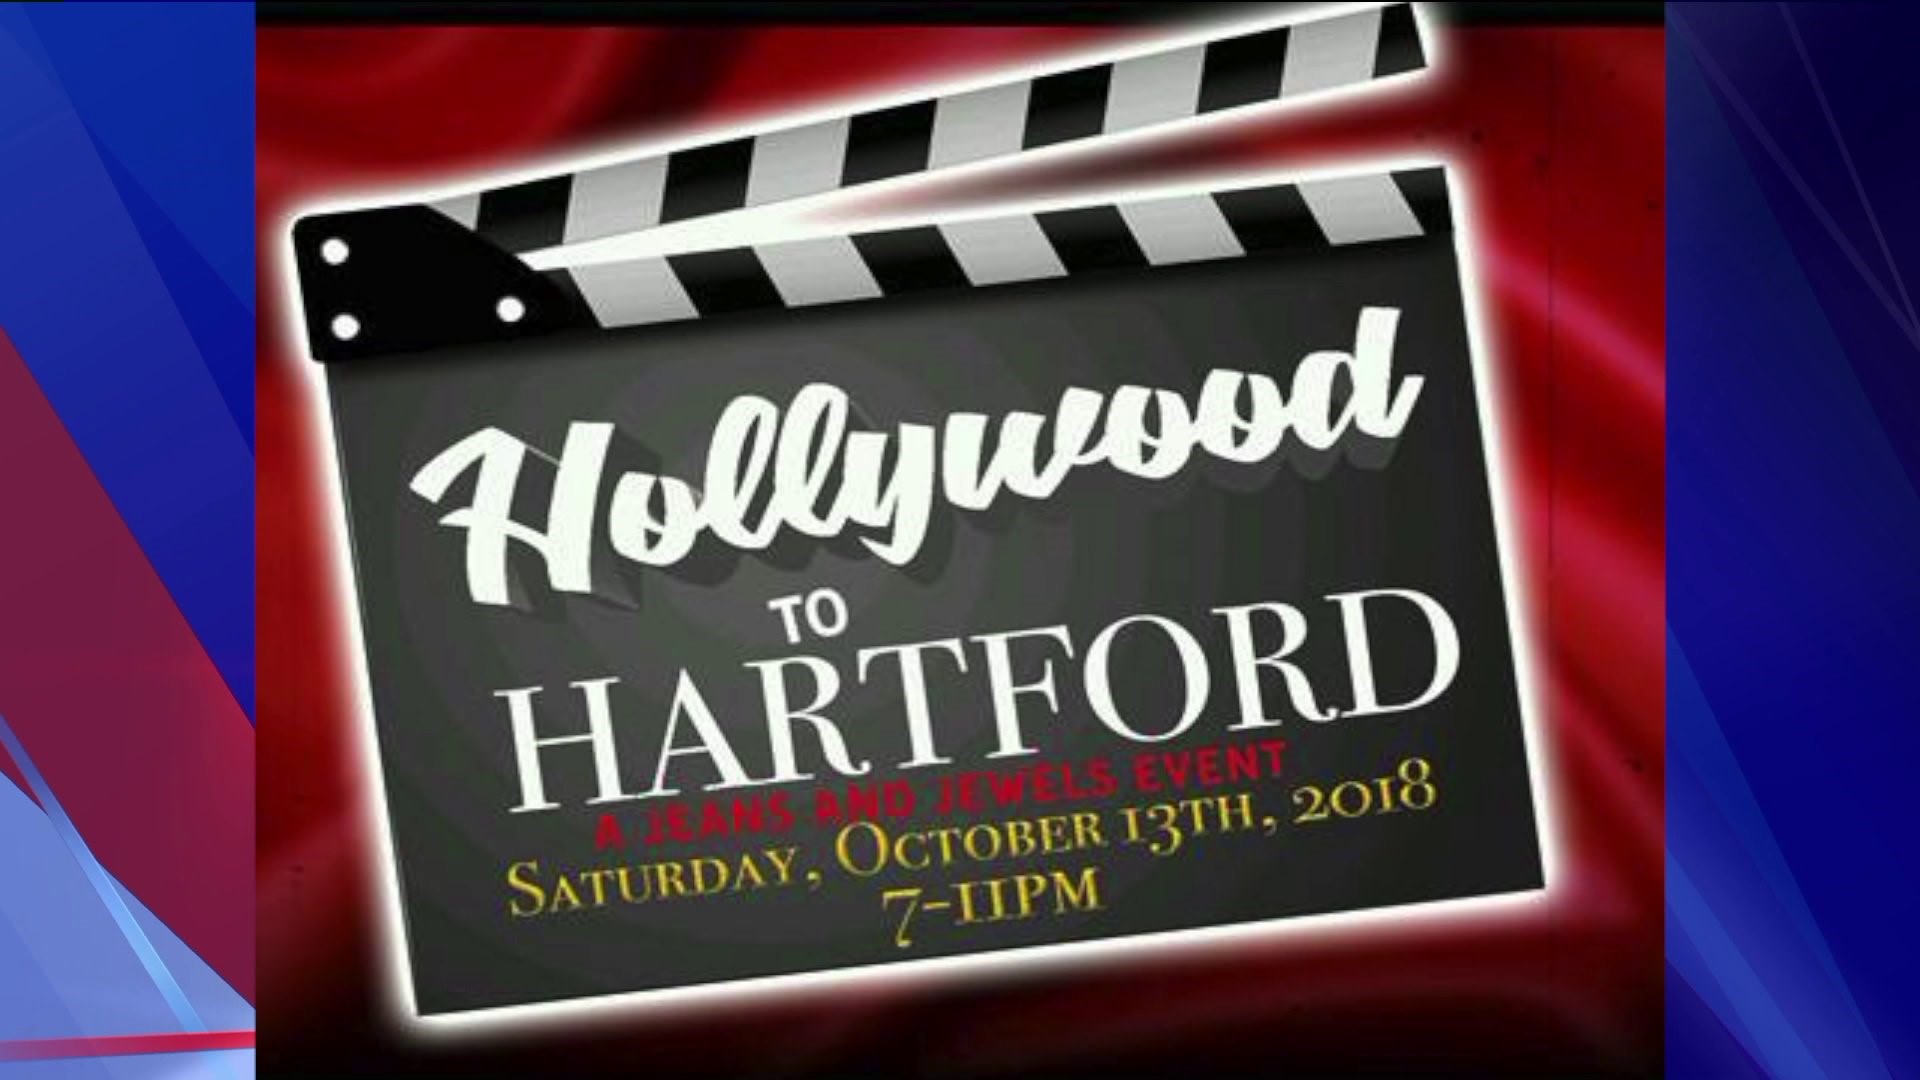 From Hollywood to Hartford